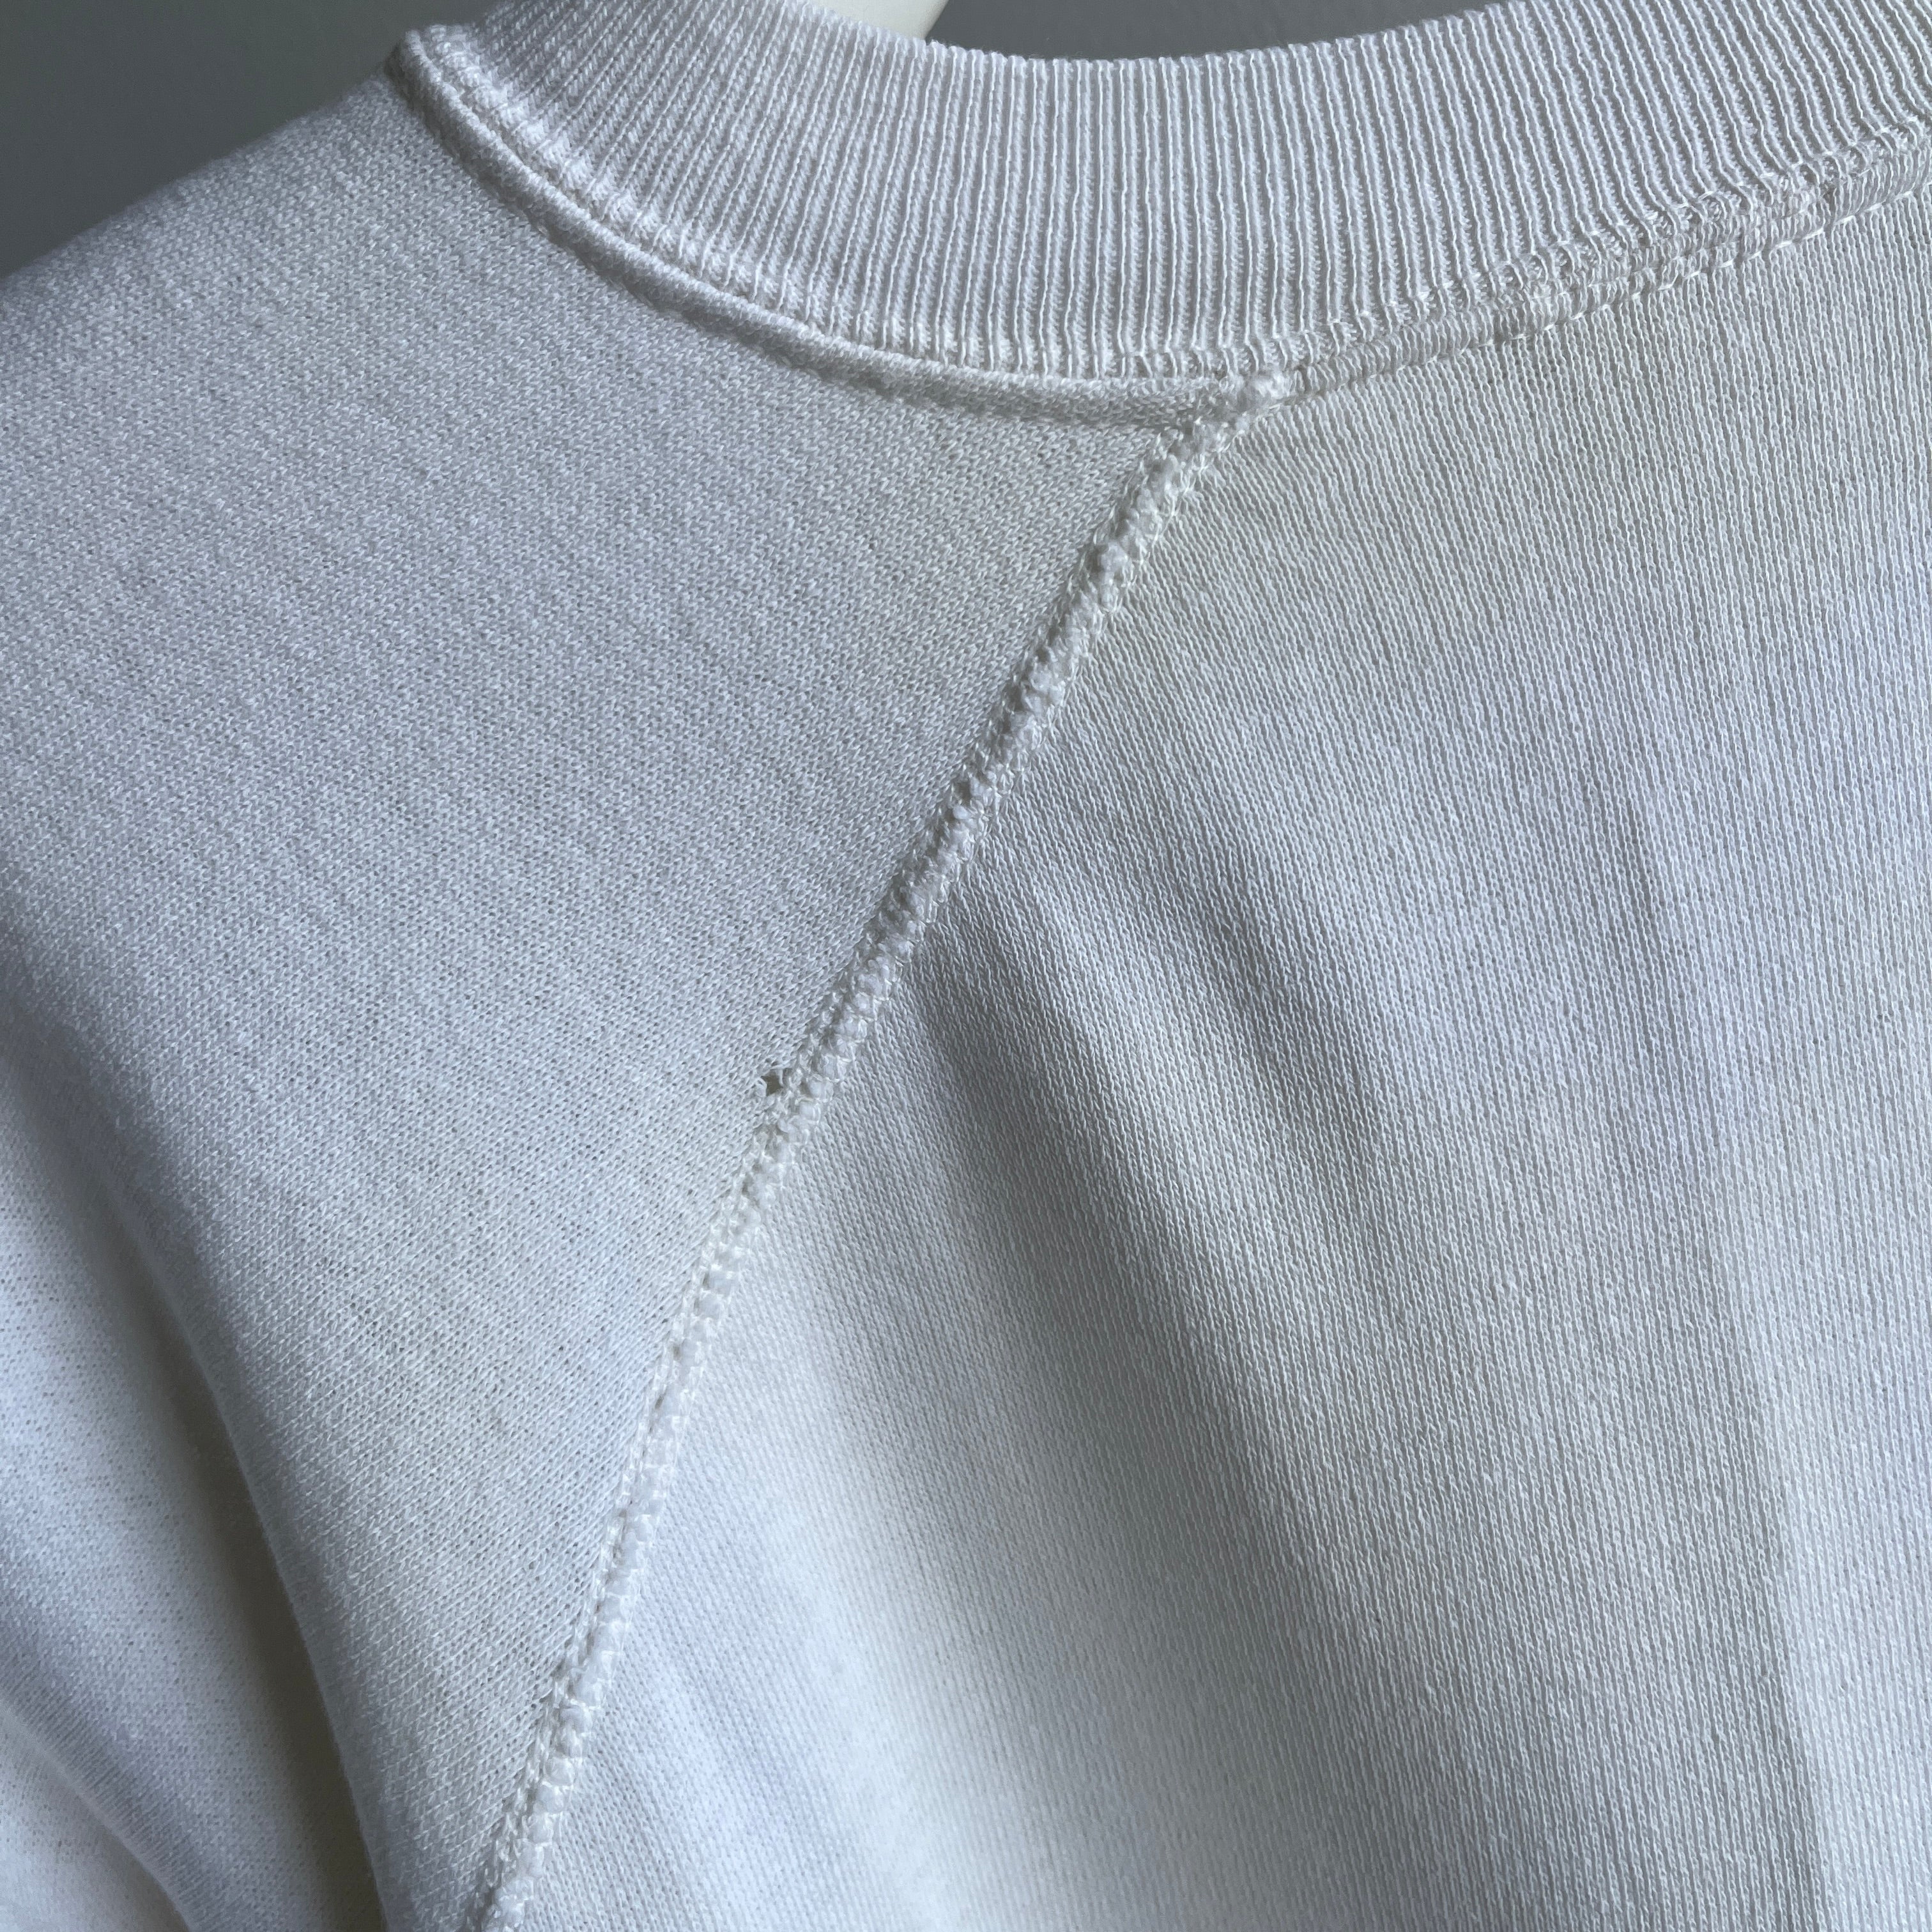 1980s Blank White Nicely Age Stained Raglan Sweatshirt